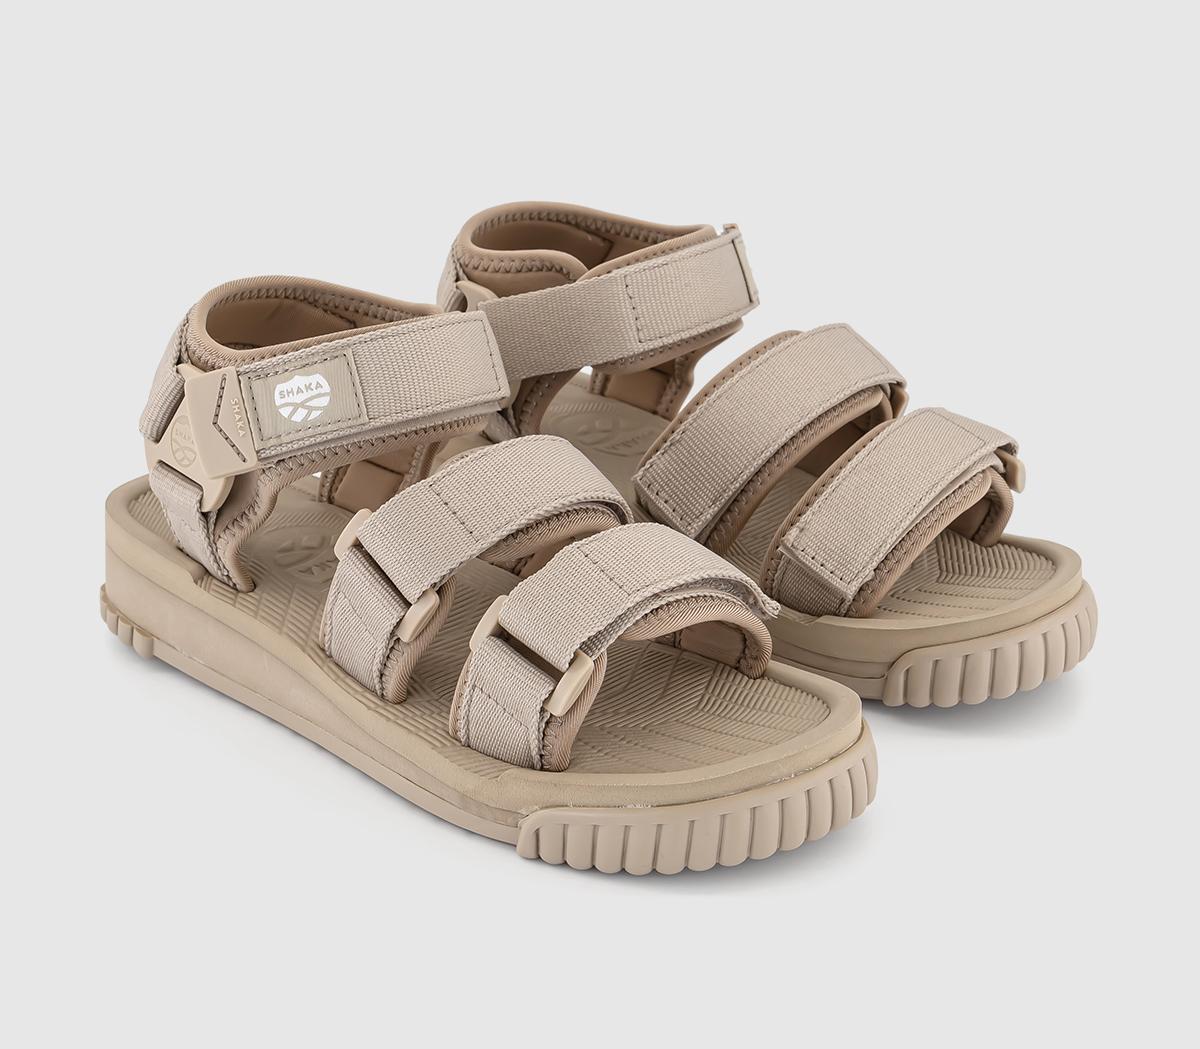 Shaka Neo Bungy Sandals Taupe Natural, 6